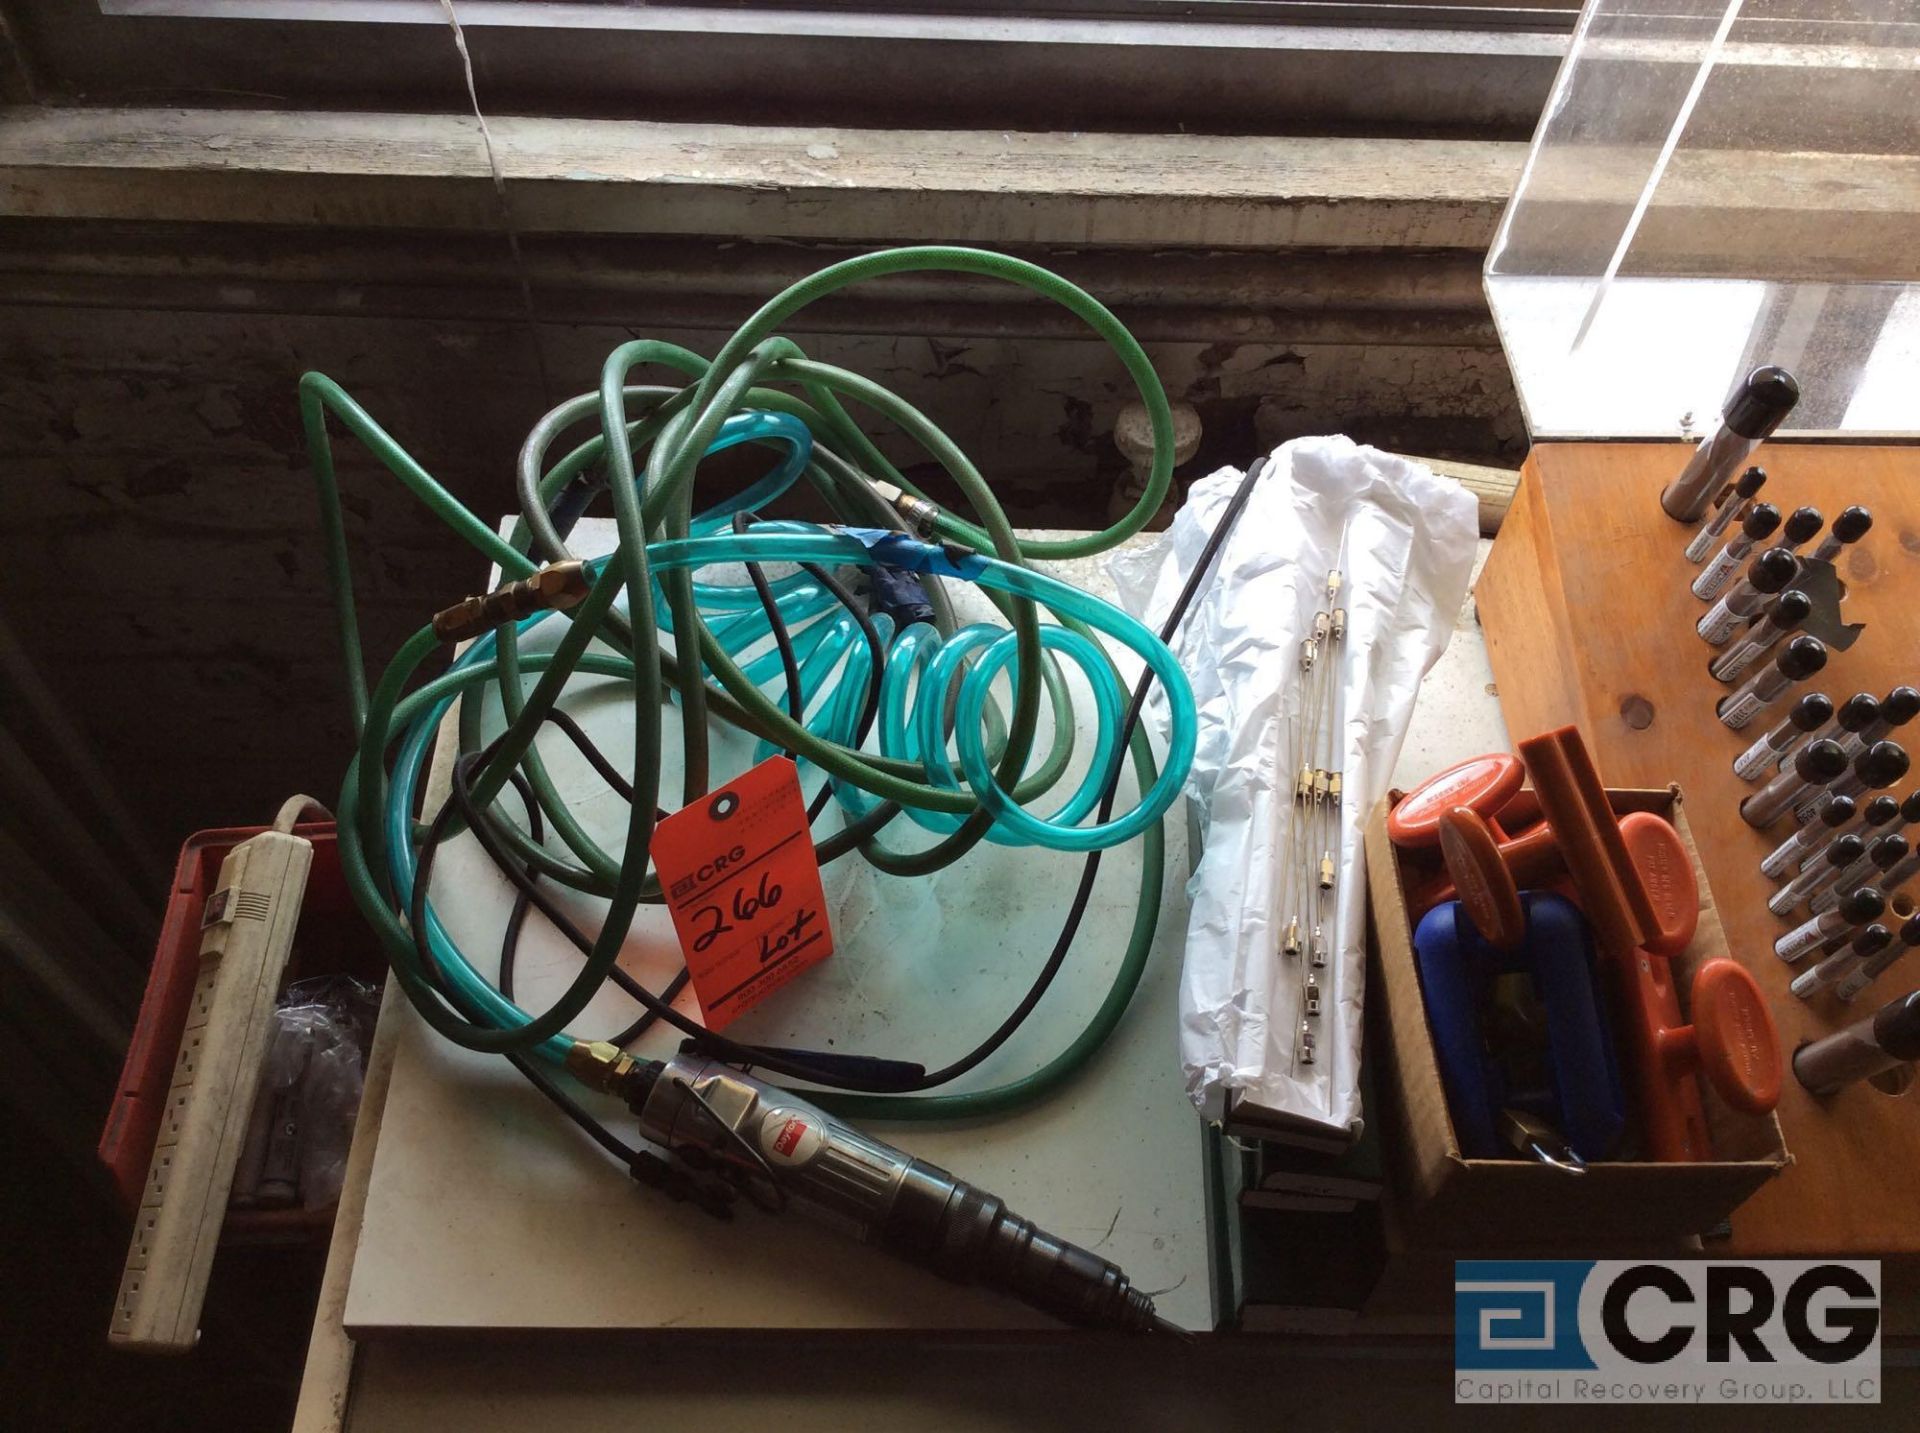 Lot consists of assorted carbide tooling, lock out/tag out safety equipment, pex tubing 3/4 in. x 25 - Image 11 of 11